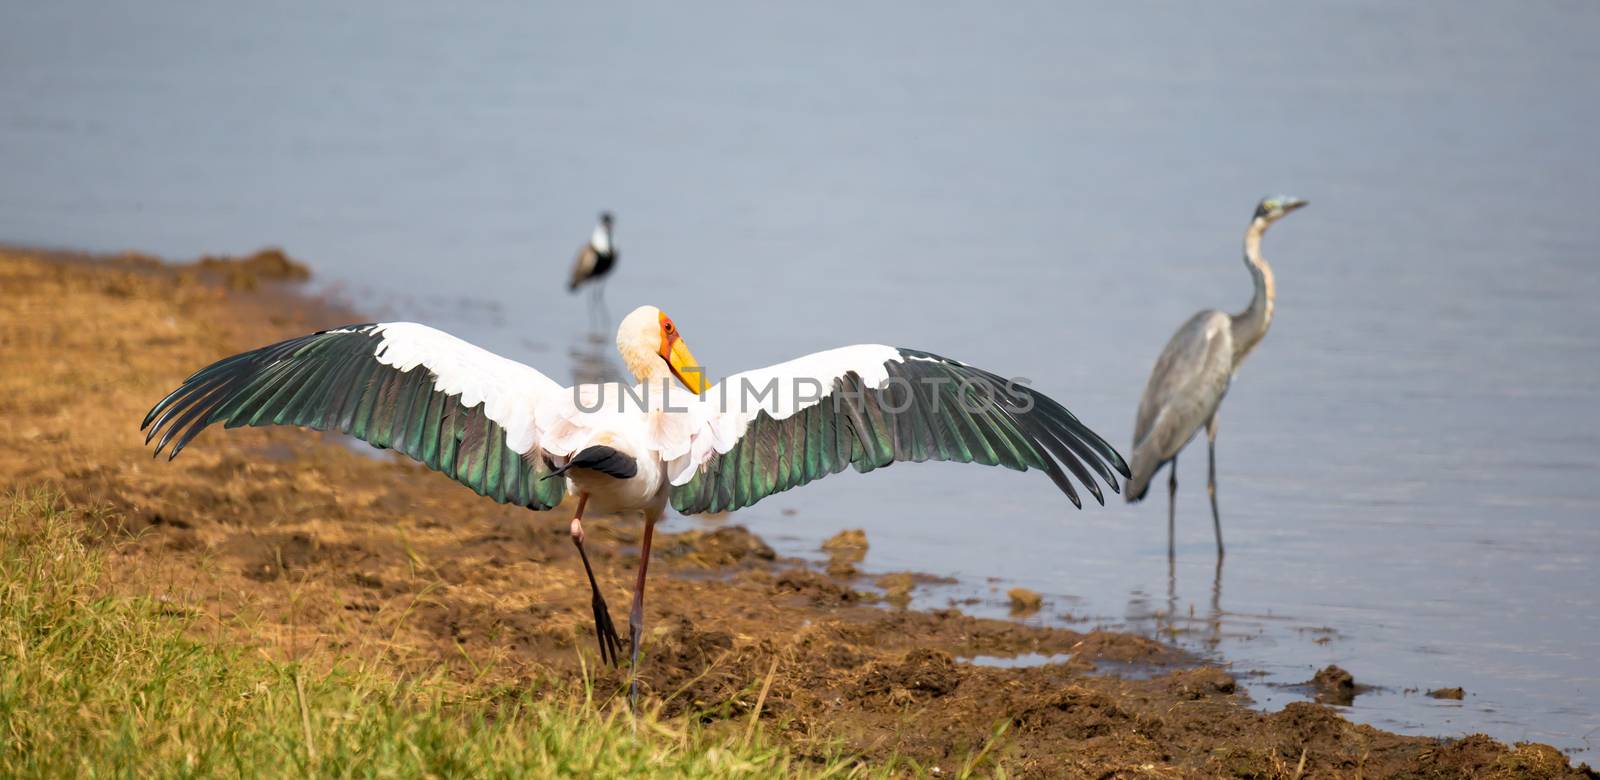 One marabou bird dries his wings at the waterhole